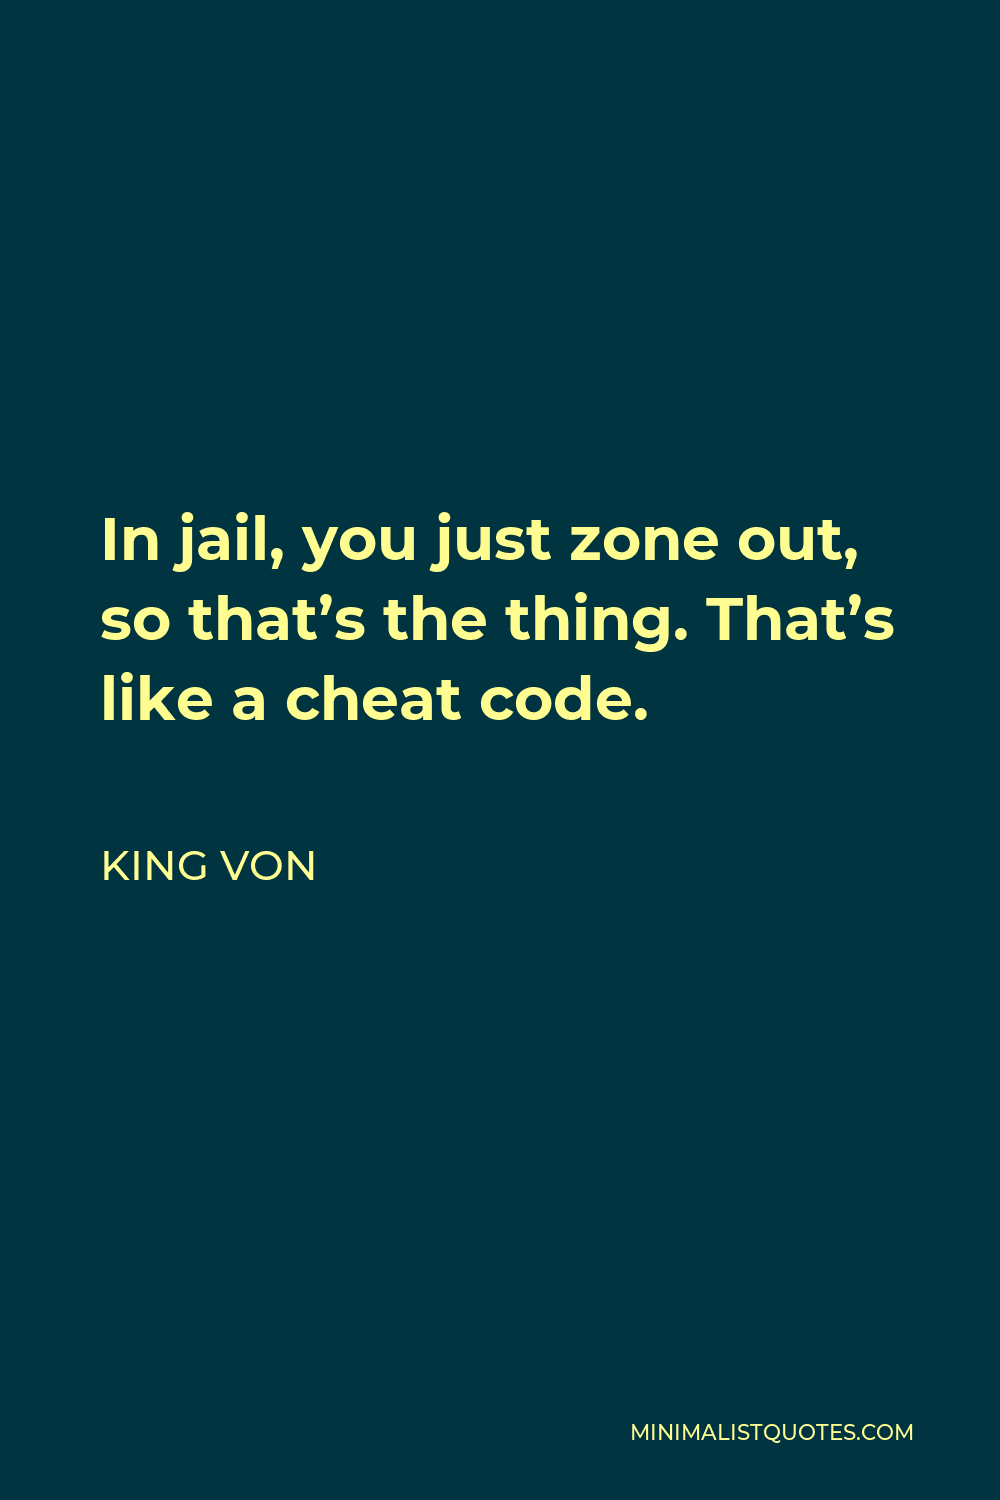 King Von Quote - In jail, you just zone out, so that’s the thing. That’s like a cheat code.